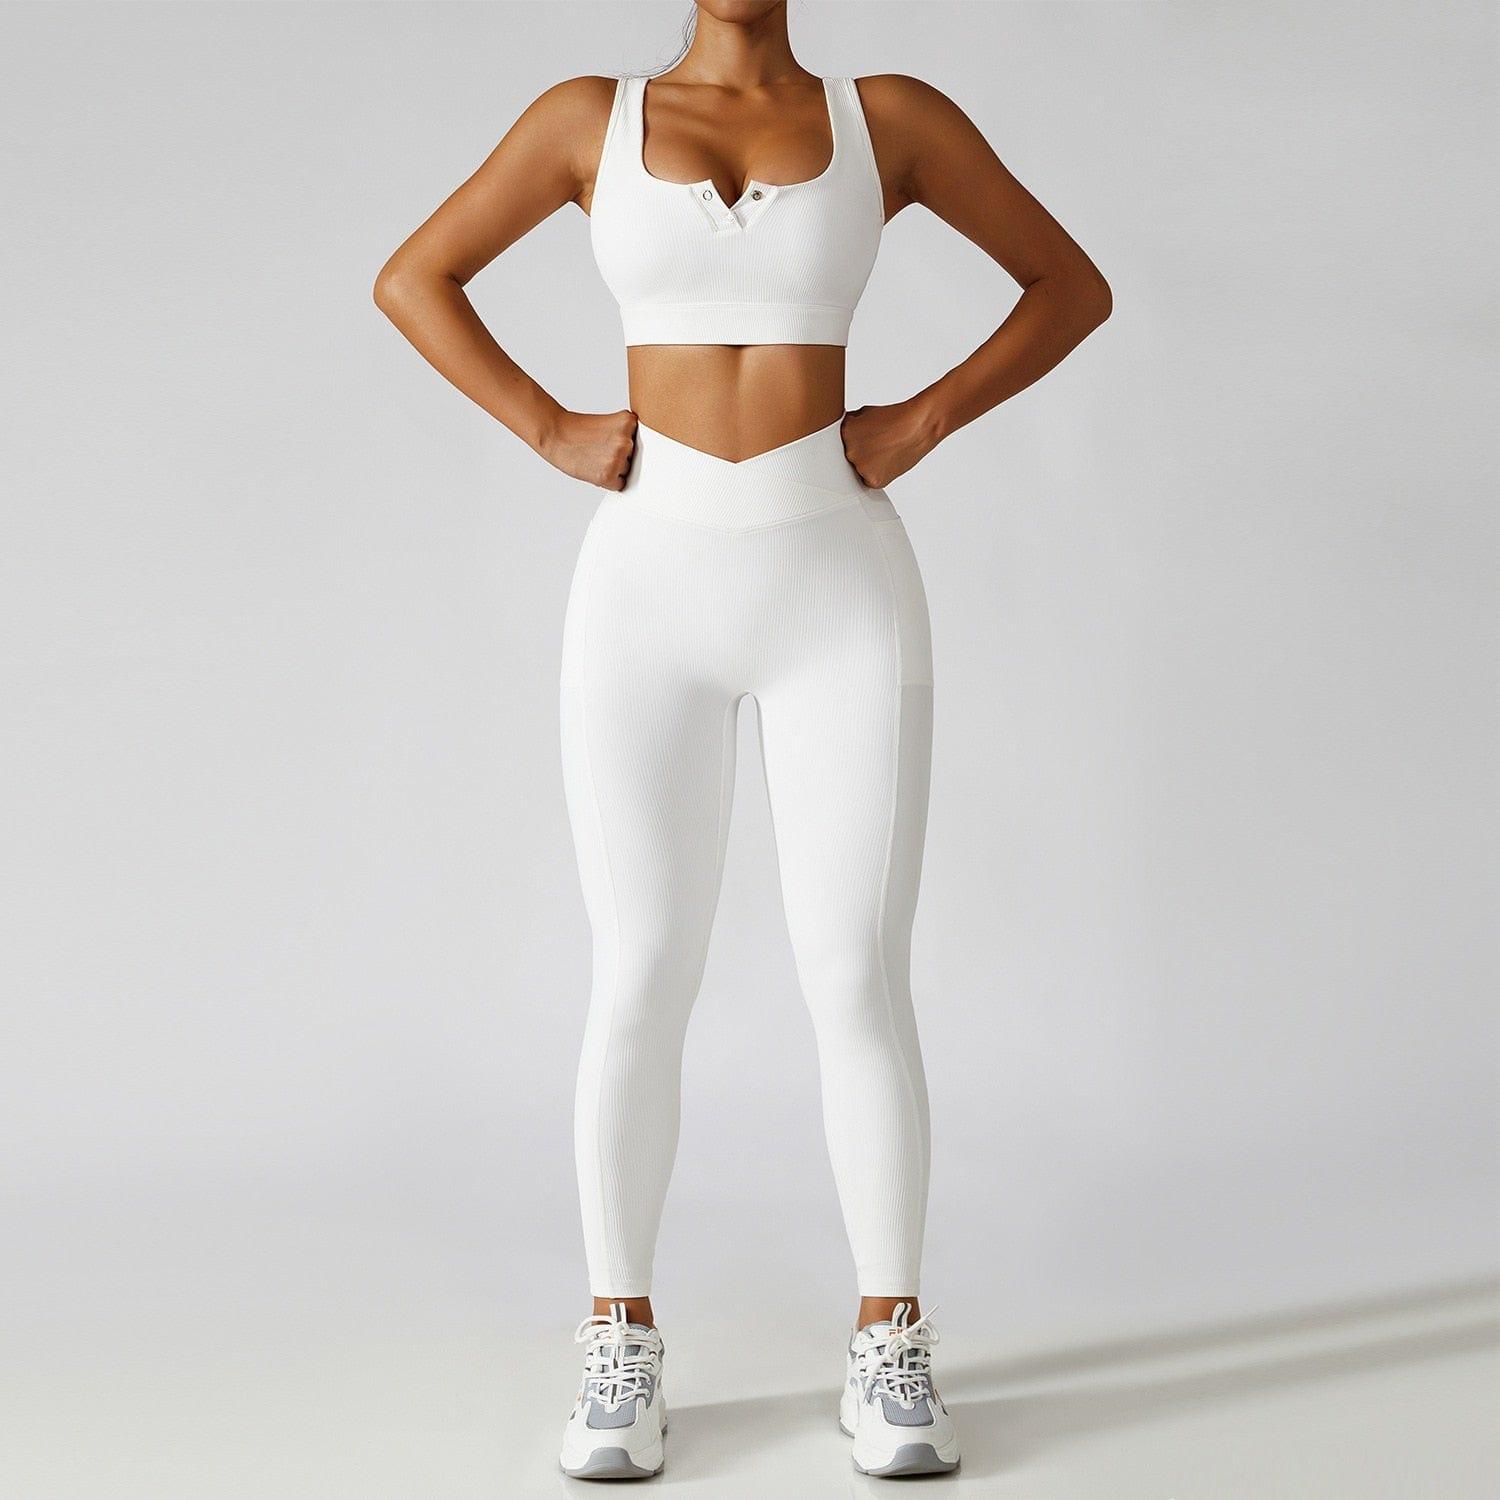 Shop 0 White suit-3 / S / China 2 Pieces Seamless Women Tracksuit  Yoga Set Running Workout Sportswear Gym Clothes Fitness Bra High Waist Leggings Sports Suit Mademoiselle Home Decor